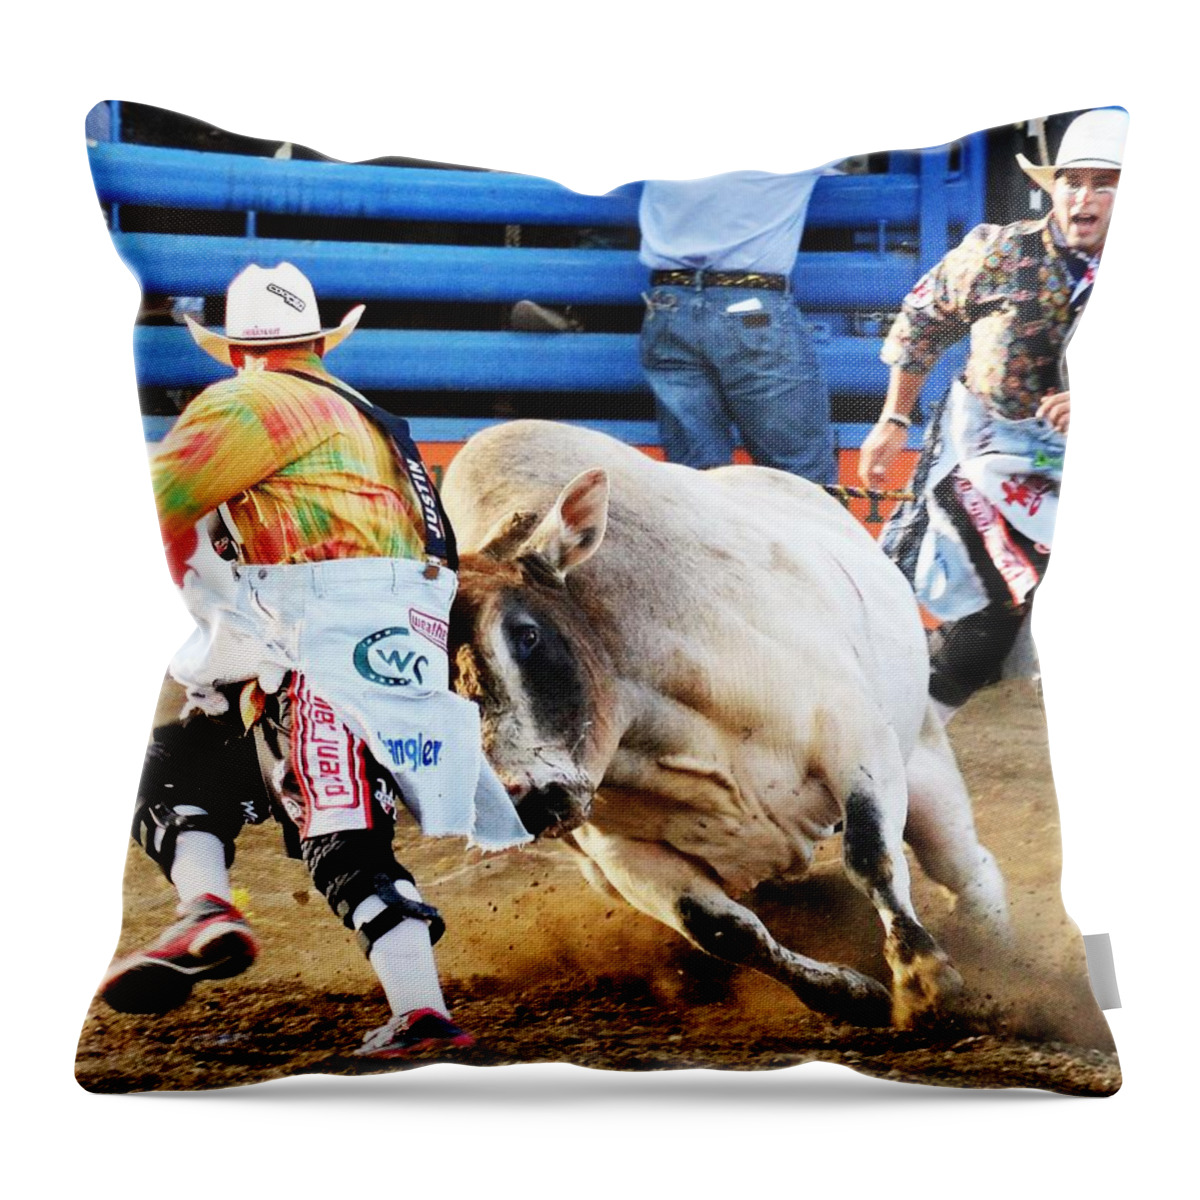 Western Art Throw Pillow featuring the photograph Bull Fighters by Alden White Ballard